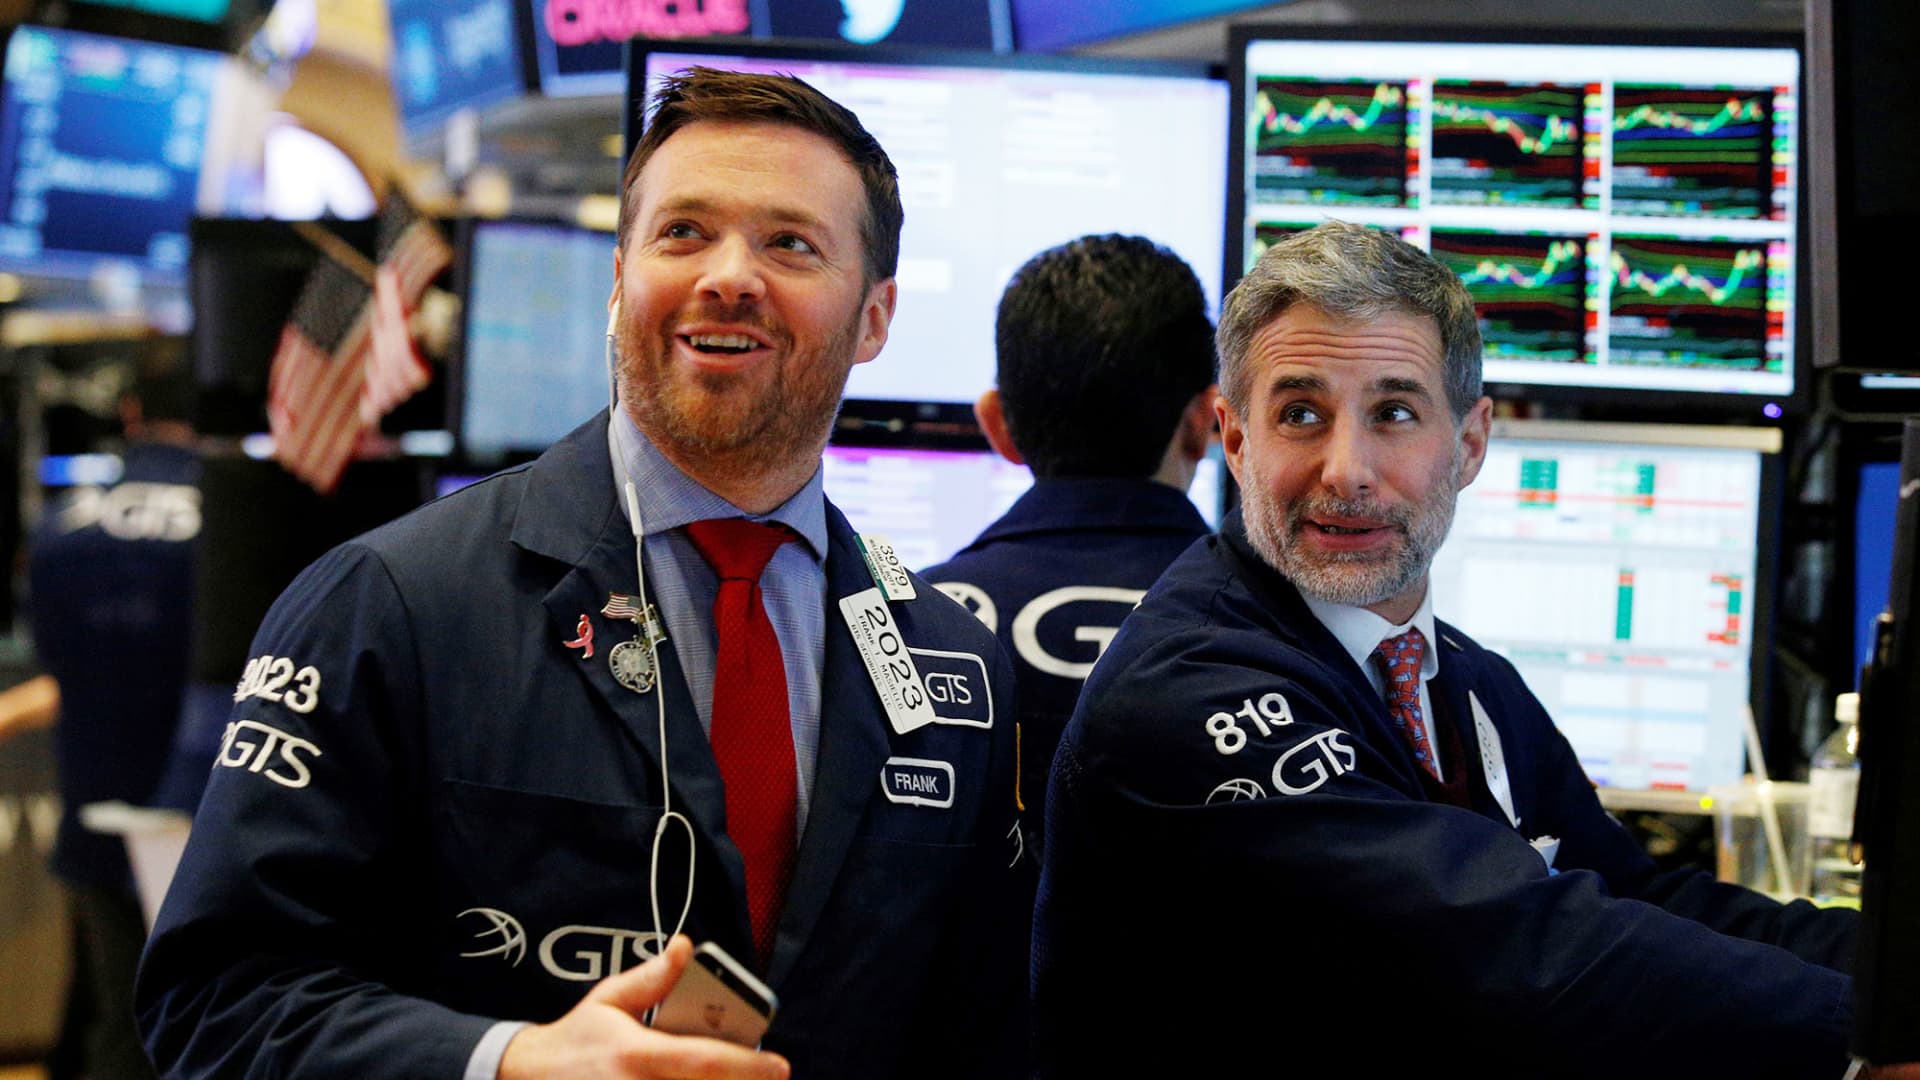 S&P 500 rallies 1% to all-time high, surpassing previous record set in 2022: Live updates